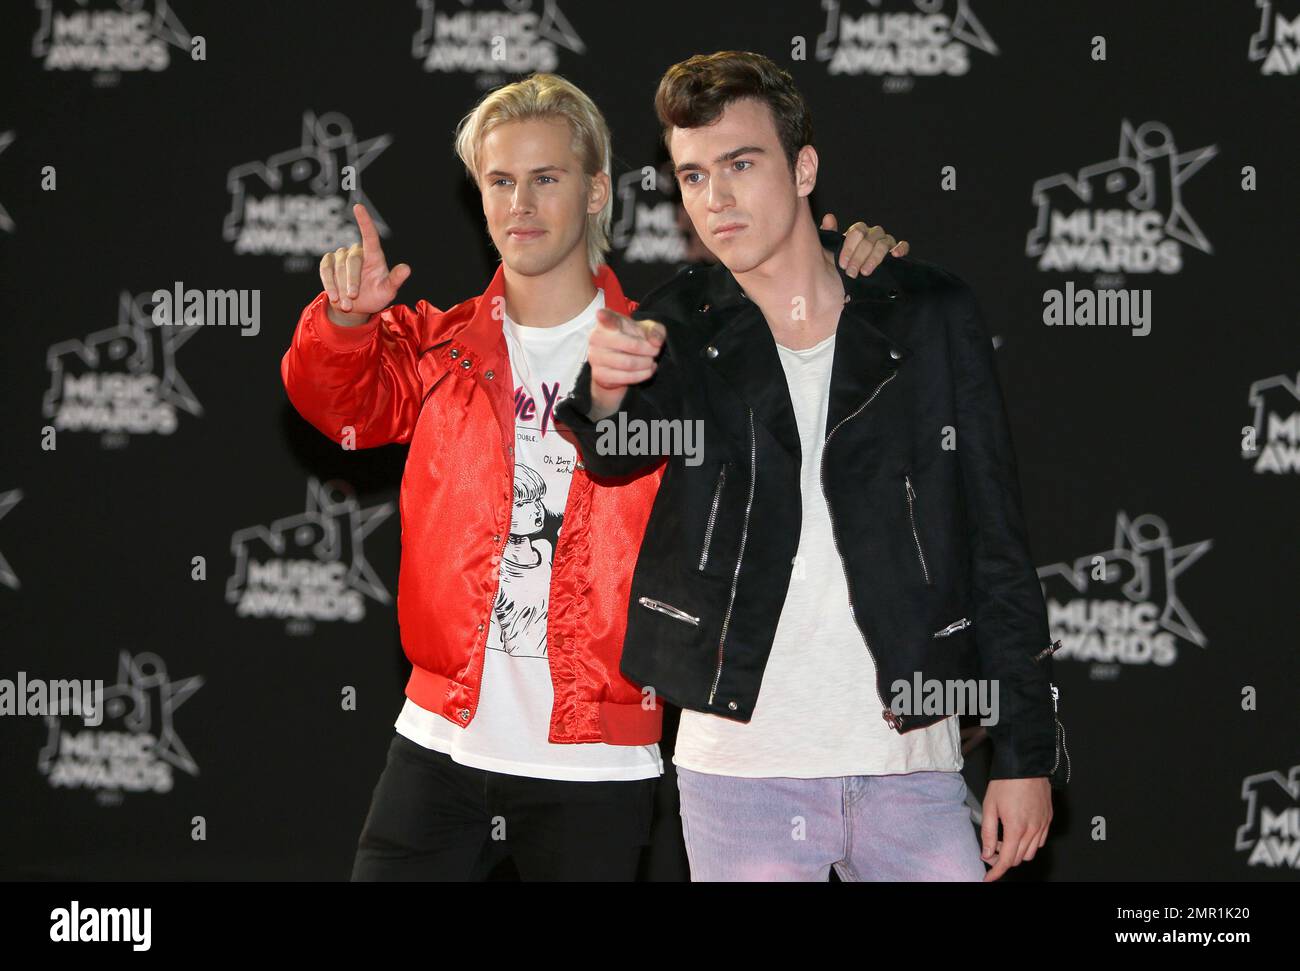 French DJ Cesar Laurent de Rummel and Dorian Lauduique of the duo Ofenbach  pose during a photocall before the NRJ Music awards ceremony, Saturday,  Nov. 4, 2017, in Cannes, southeastern France. (AP